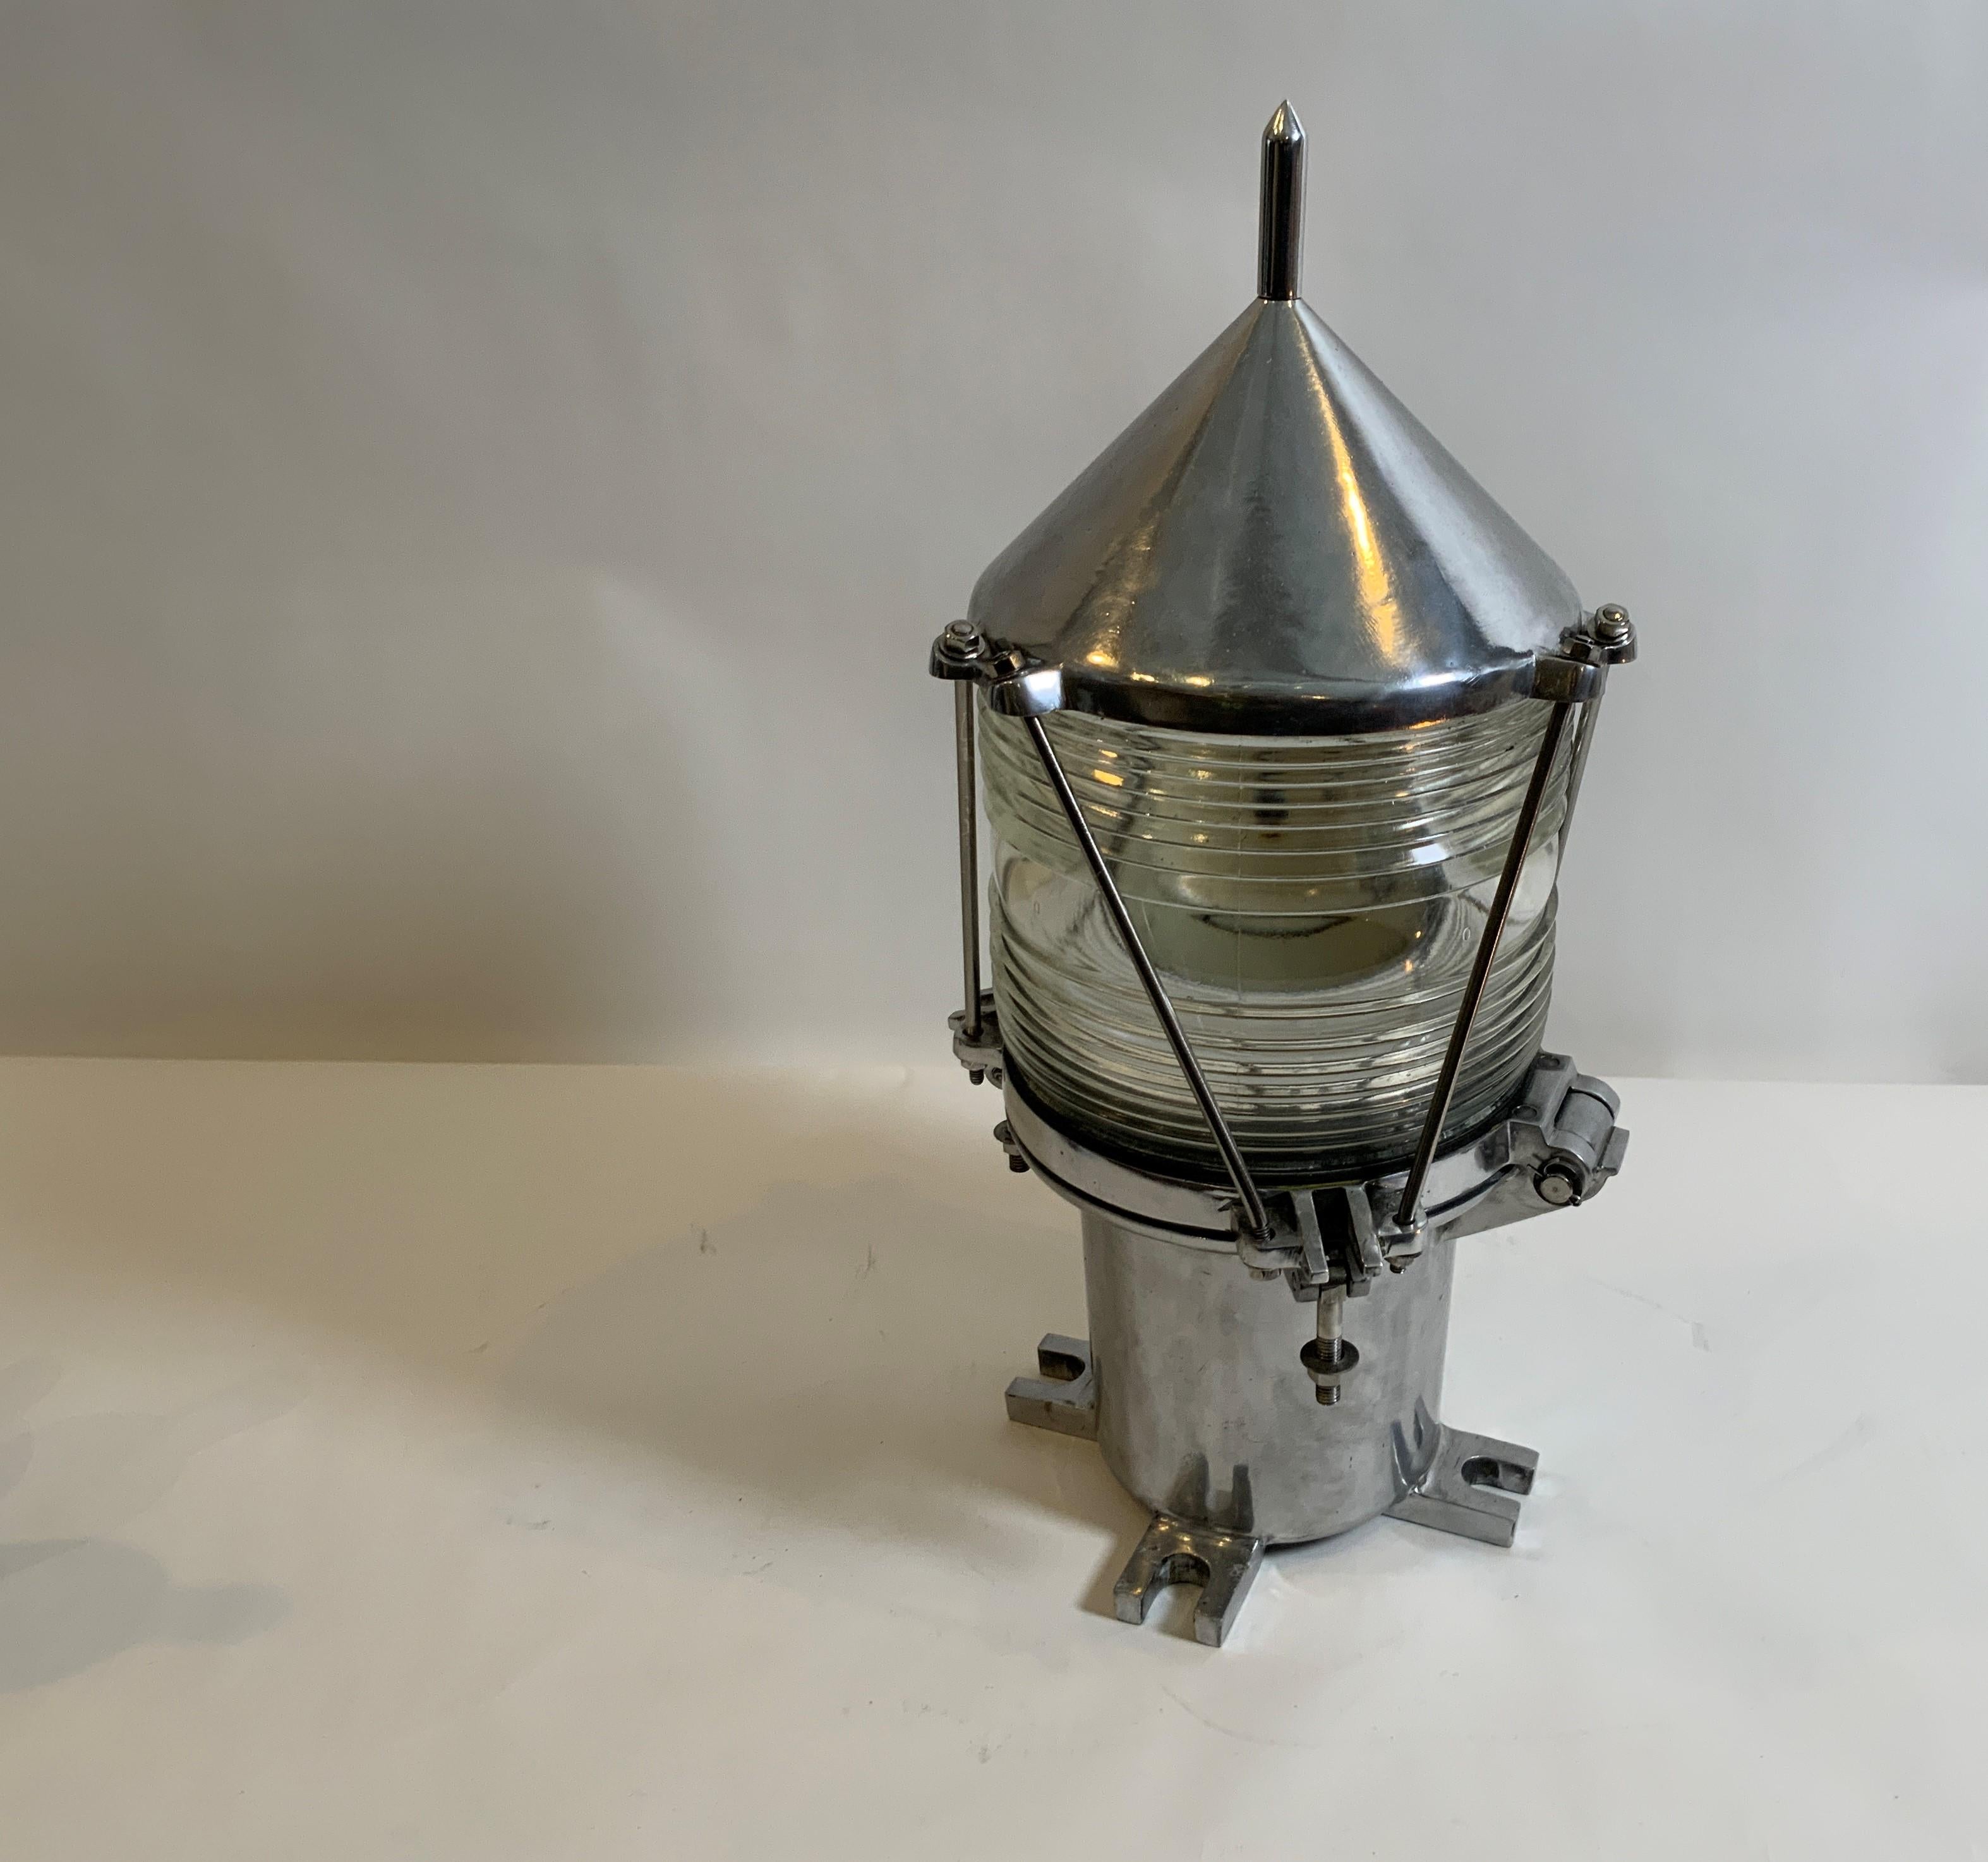 Highly polished marine beacon with Fresnel lens. Fitted with protective bars, four flange feet and spiked top. Marked BU-16 and U.S.C.G. Converted to electricity. Circa 1950.

Overall dimensions: 23